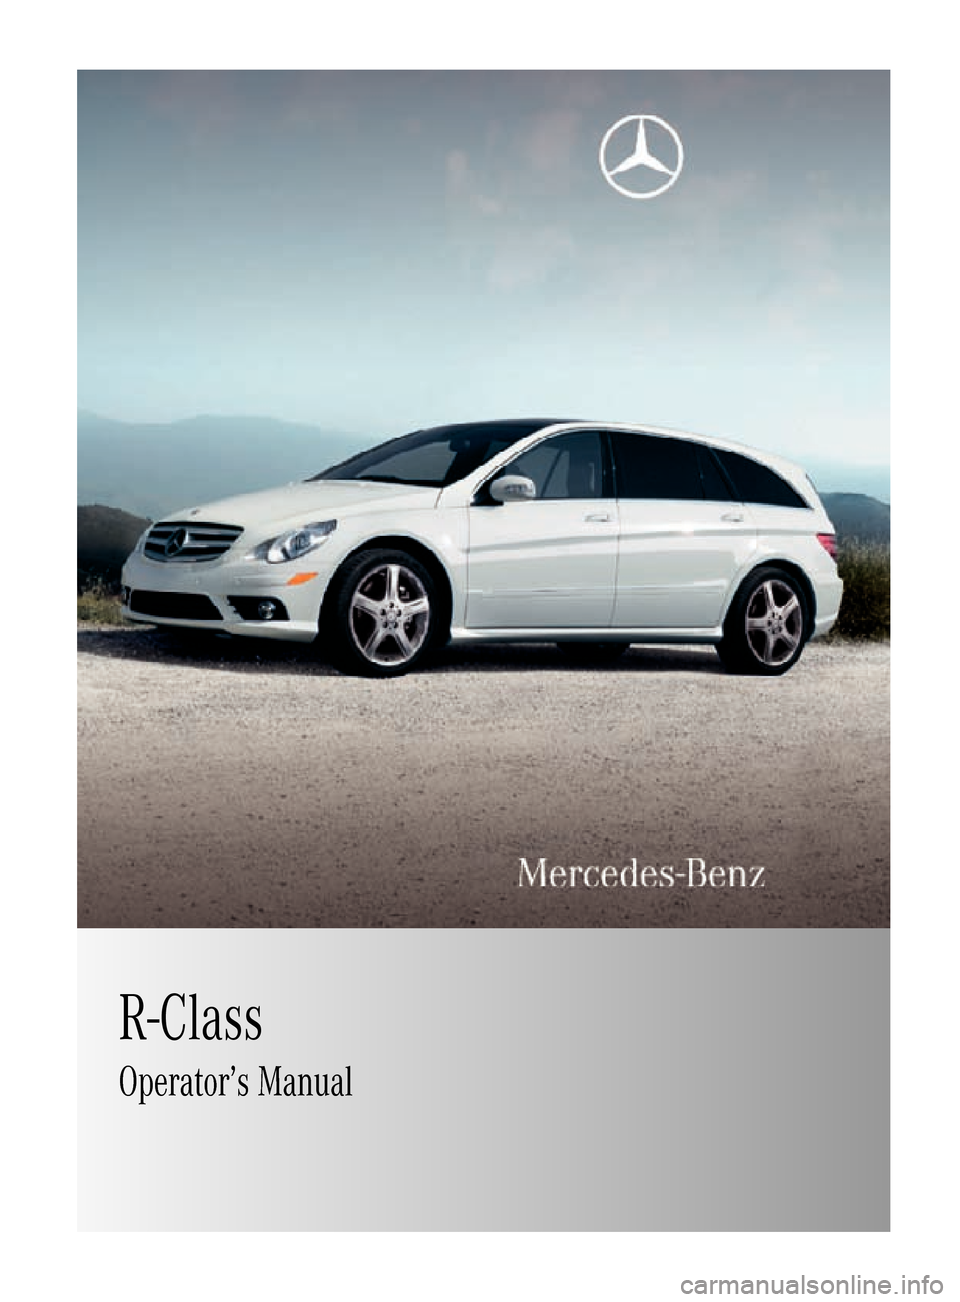 MERCEDES-BENZ R320 2010 W251 Owners Manual R-Class
Operator’s Manual
251_AKB; 4; 52, en-US
d2ureepe,Version: 2.11.8.1 2009-03-23T09:22:52+01:00 - Seite 1    